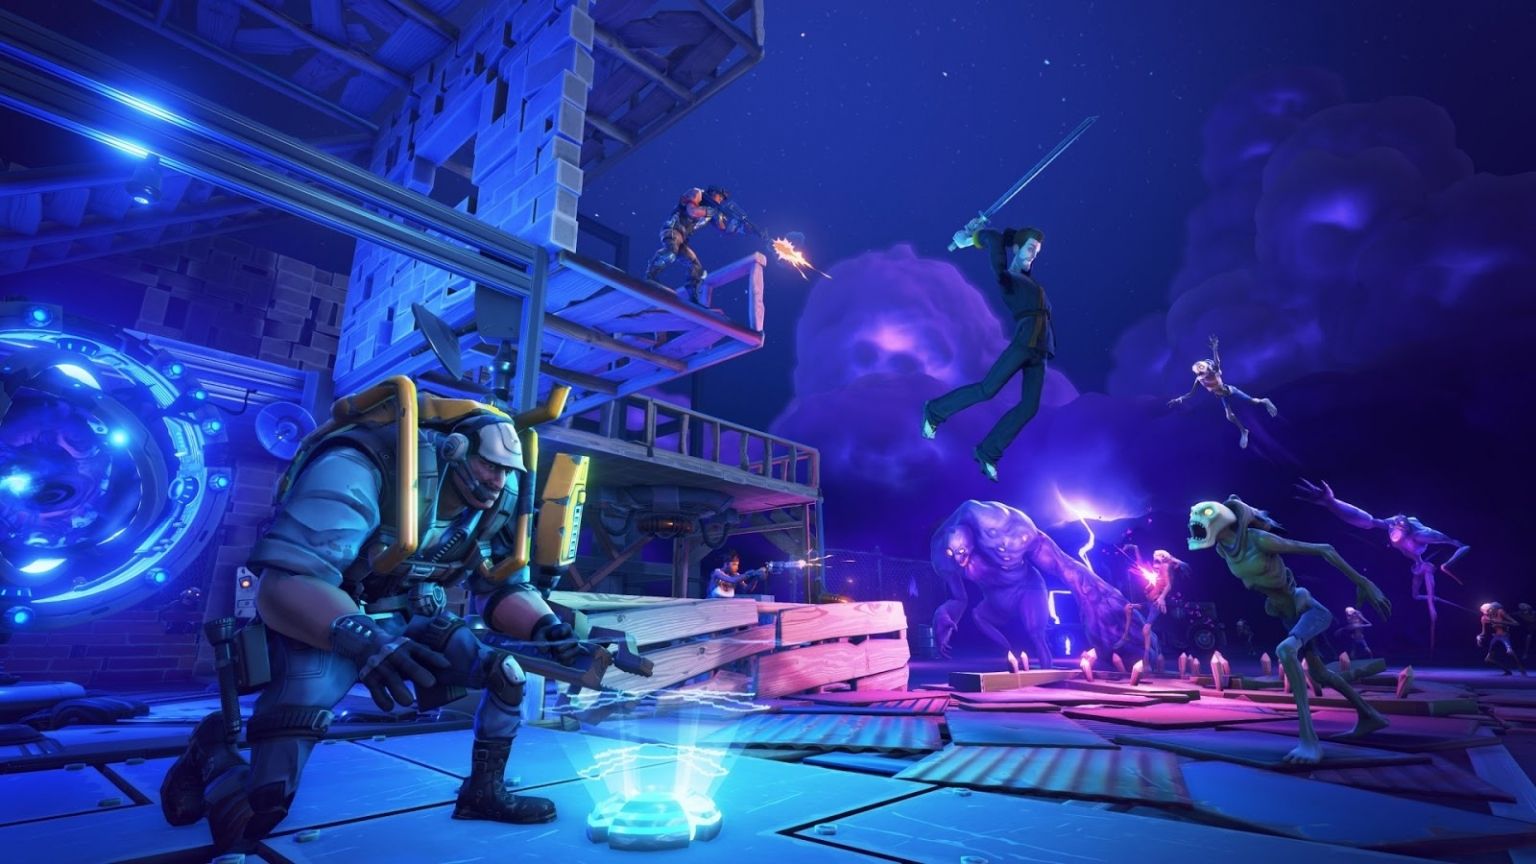 Free download Download Fortnite HD Wallpaper Playstation Xbox